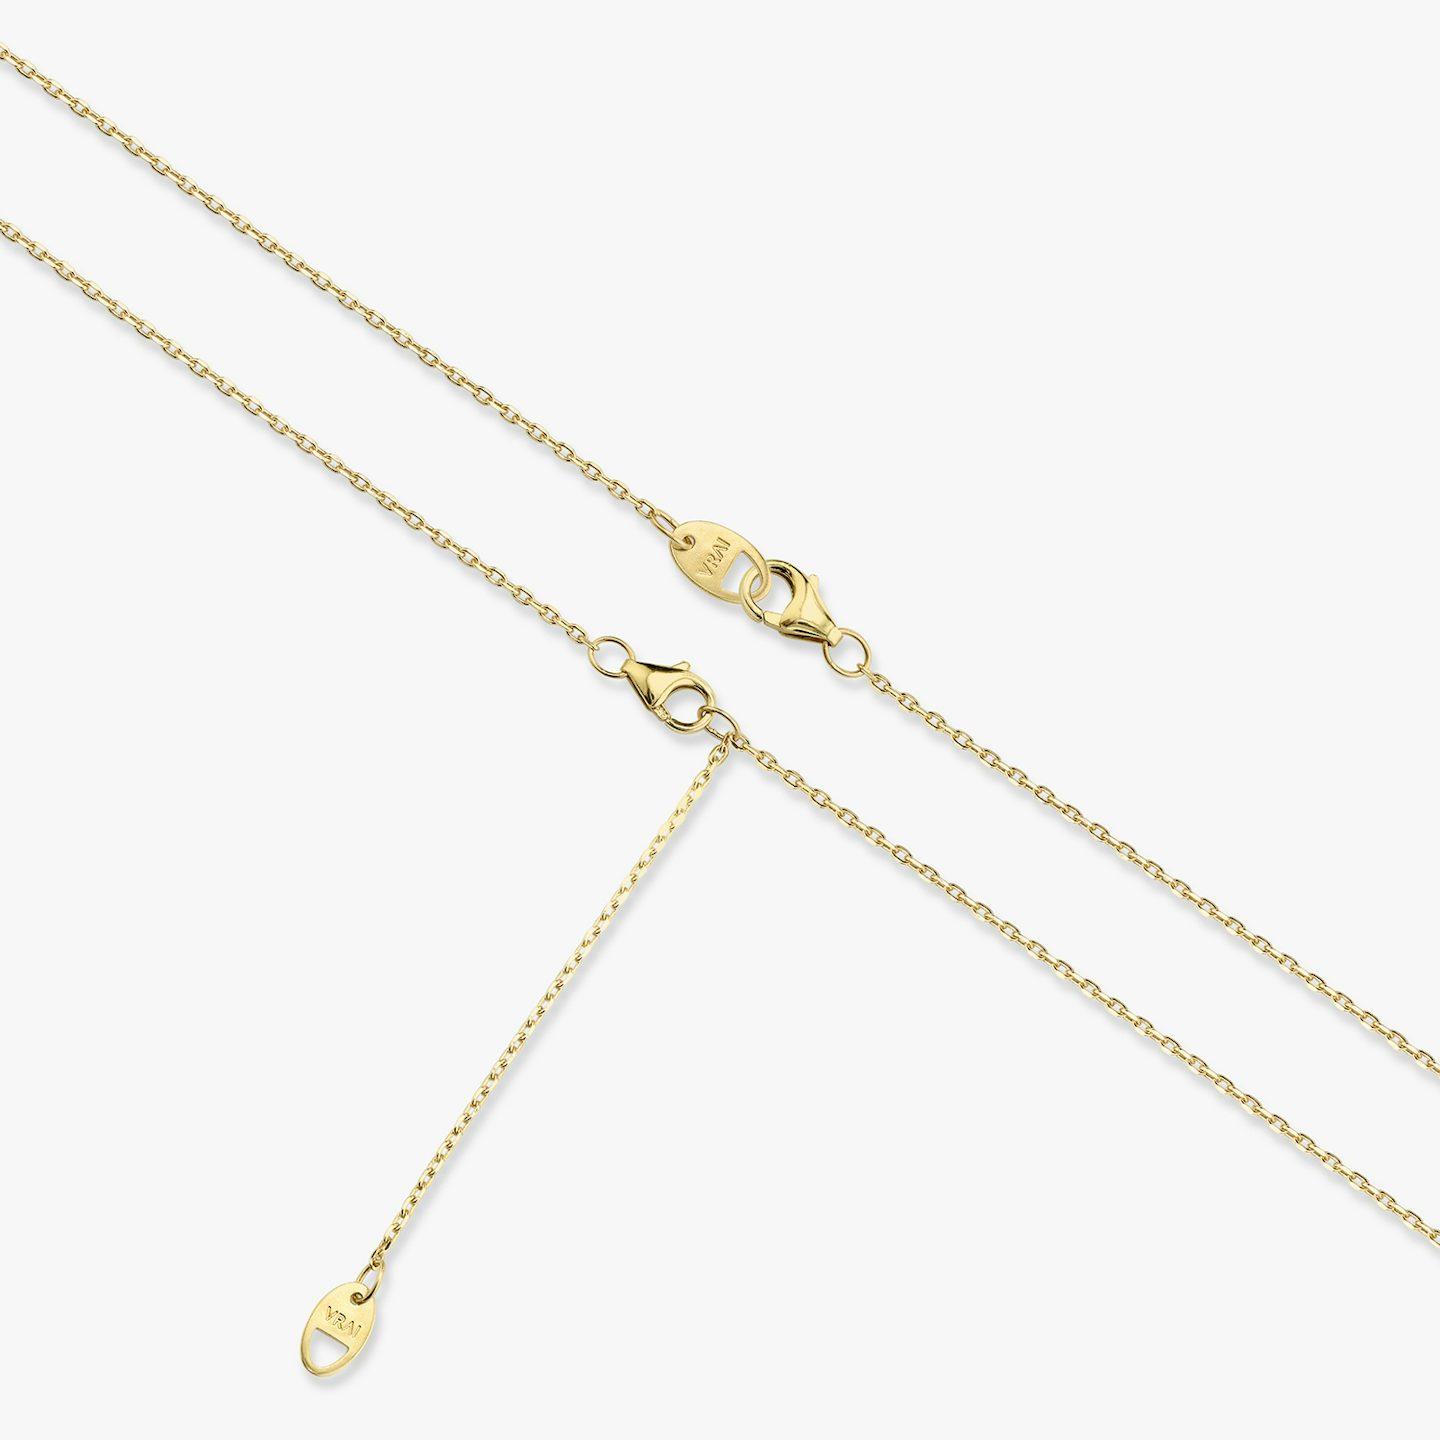 VRAI Solitaire Necklace | Emerald | 14k | 18k Yellow Gold | Carat weight: 1/2